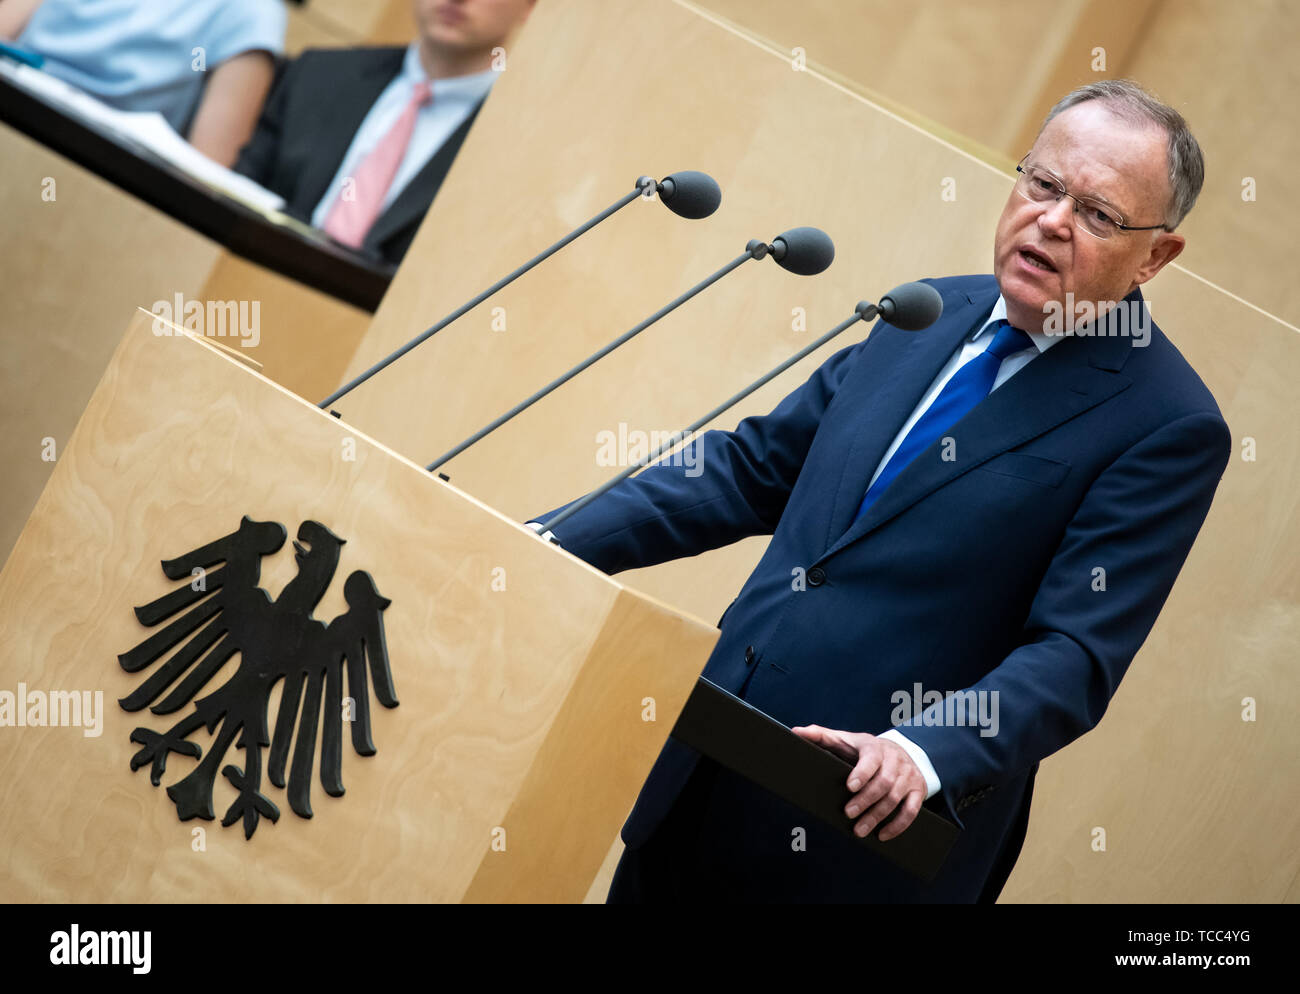 Berlin, Germany. 07th June, 2019. Stephan Weil (SPD), Prime Minister of Lower Saxony, speaks at the 978th session of the Bundesrat. Among other things, the Federal Council discusses a reform of the Bafög, the right to vote for people with full care, initiatives to speed up criminal proceedings, and the annual pension adjustment. Credit: Bernd von Jutrczenka/dpa/Alamy Live News Stock Photo